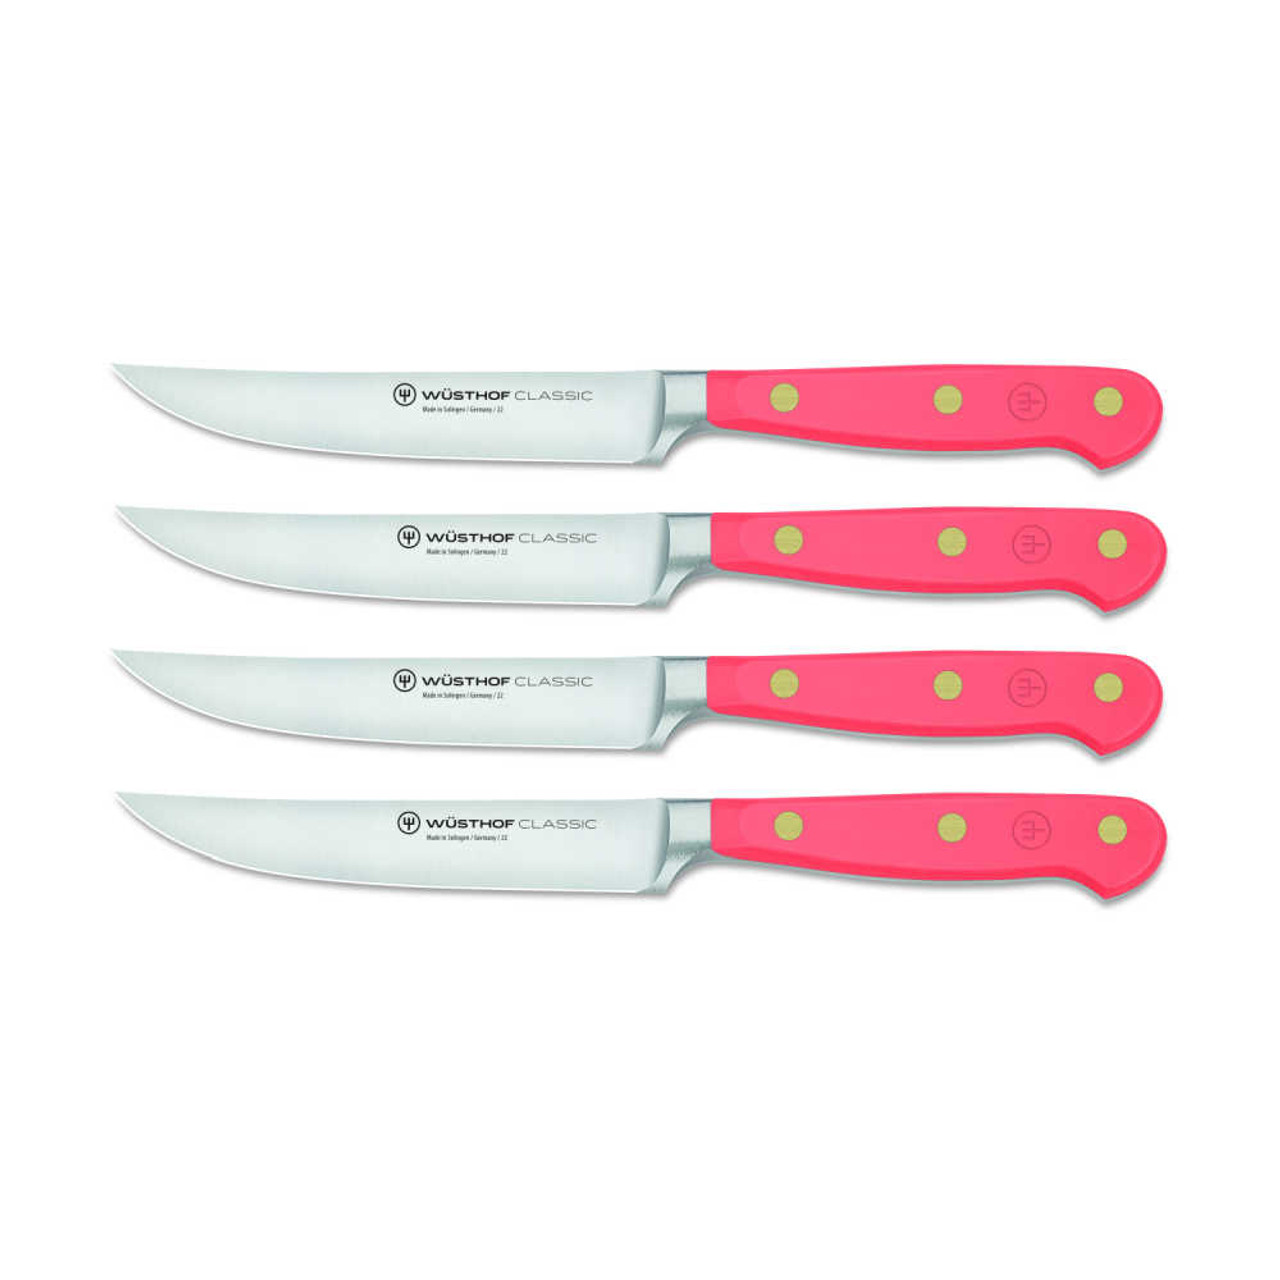 https://cdn11.bigcommerce.com/s-hccytny0od/images/stencil/1280x1280/products/5390/23404/Wusthof_Classic_Color_4-Piece_Steak_Knife_Set_Coral_Peach__10364.1682004897.jpg?c=2?imbypass=on